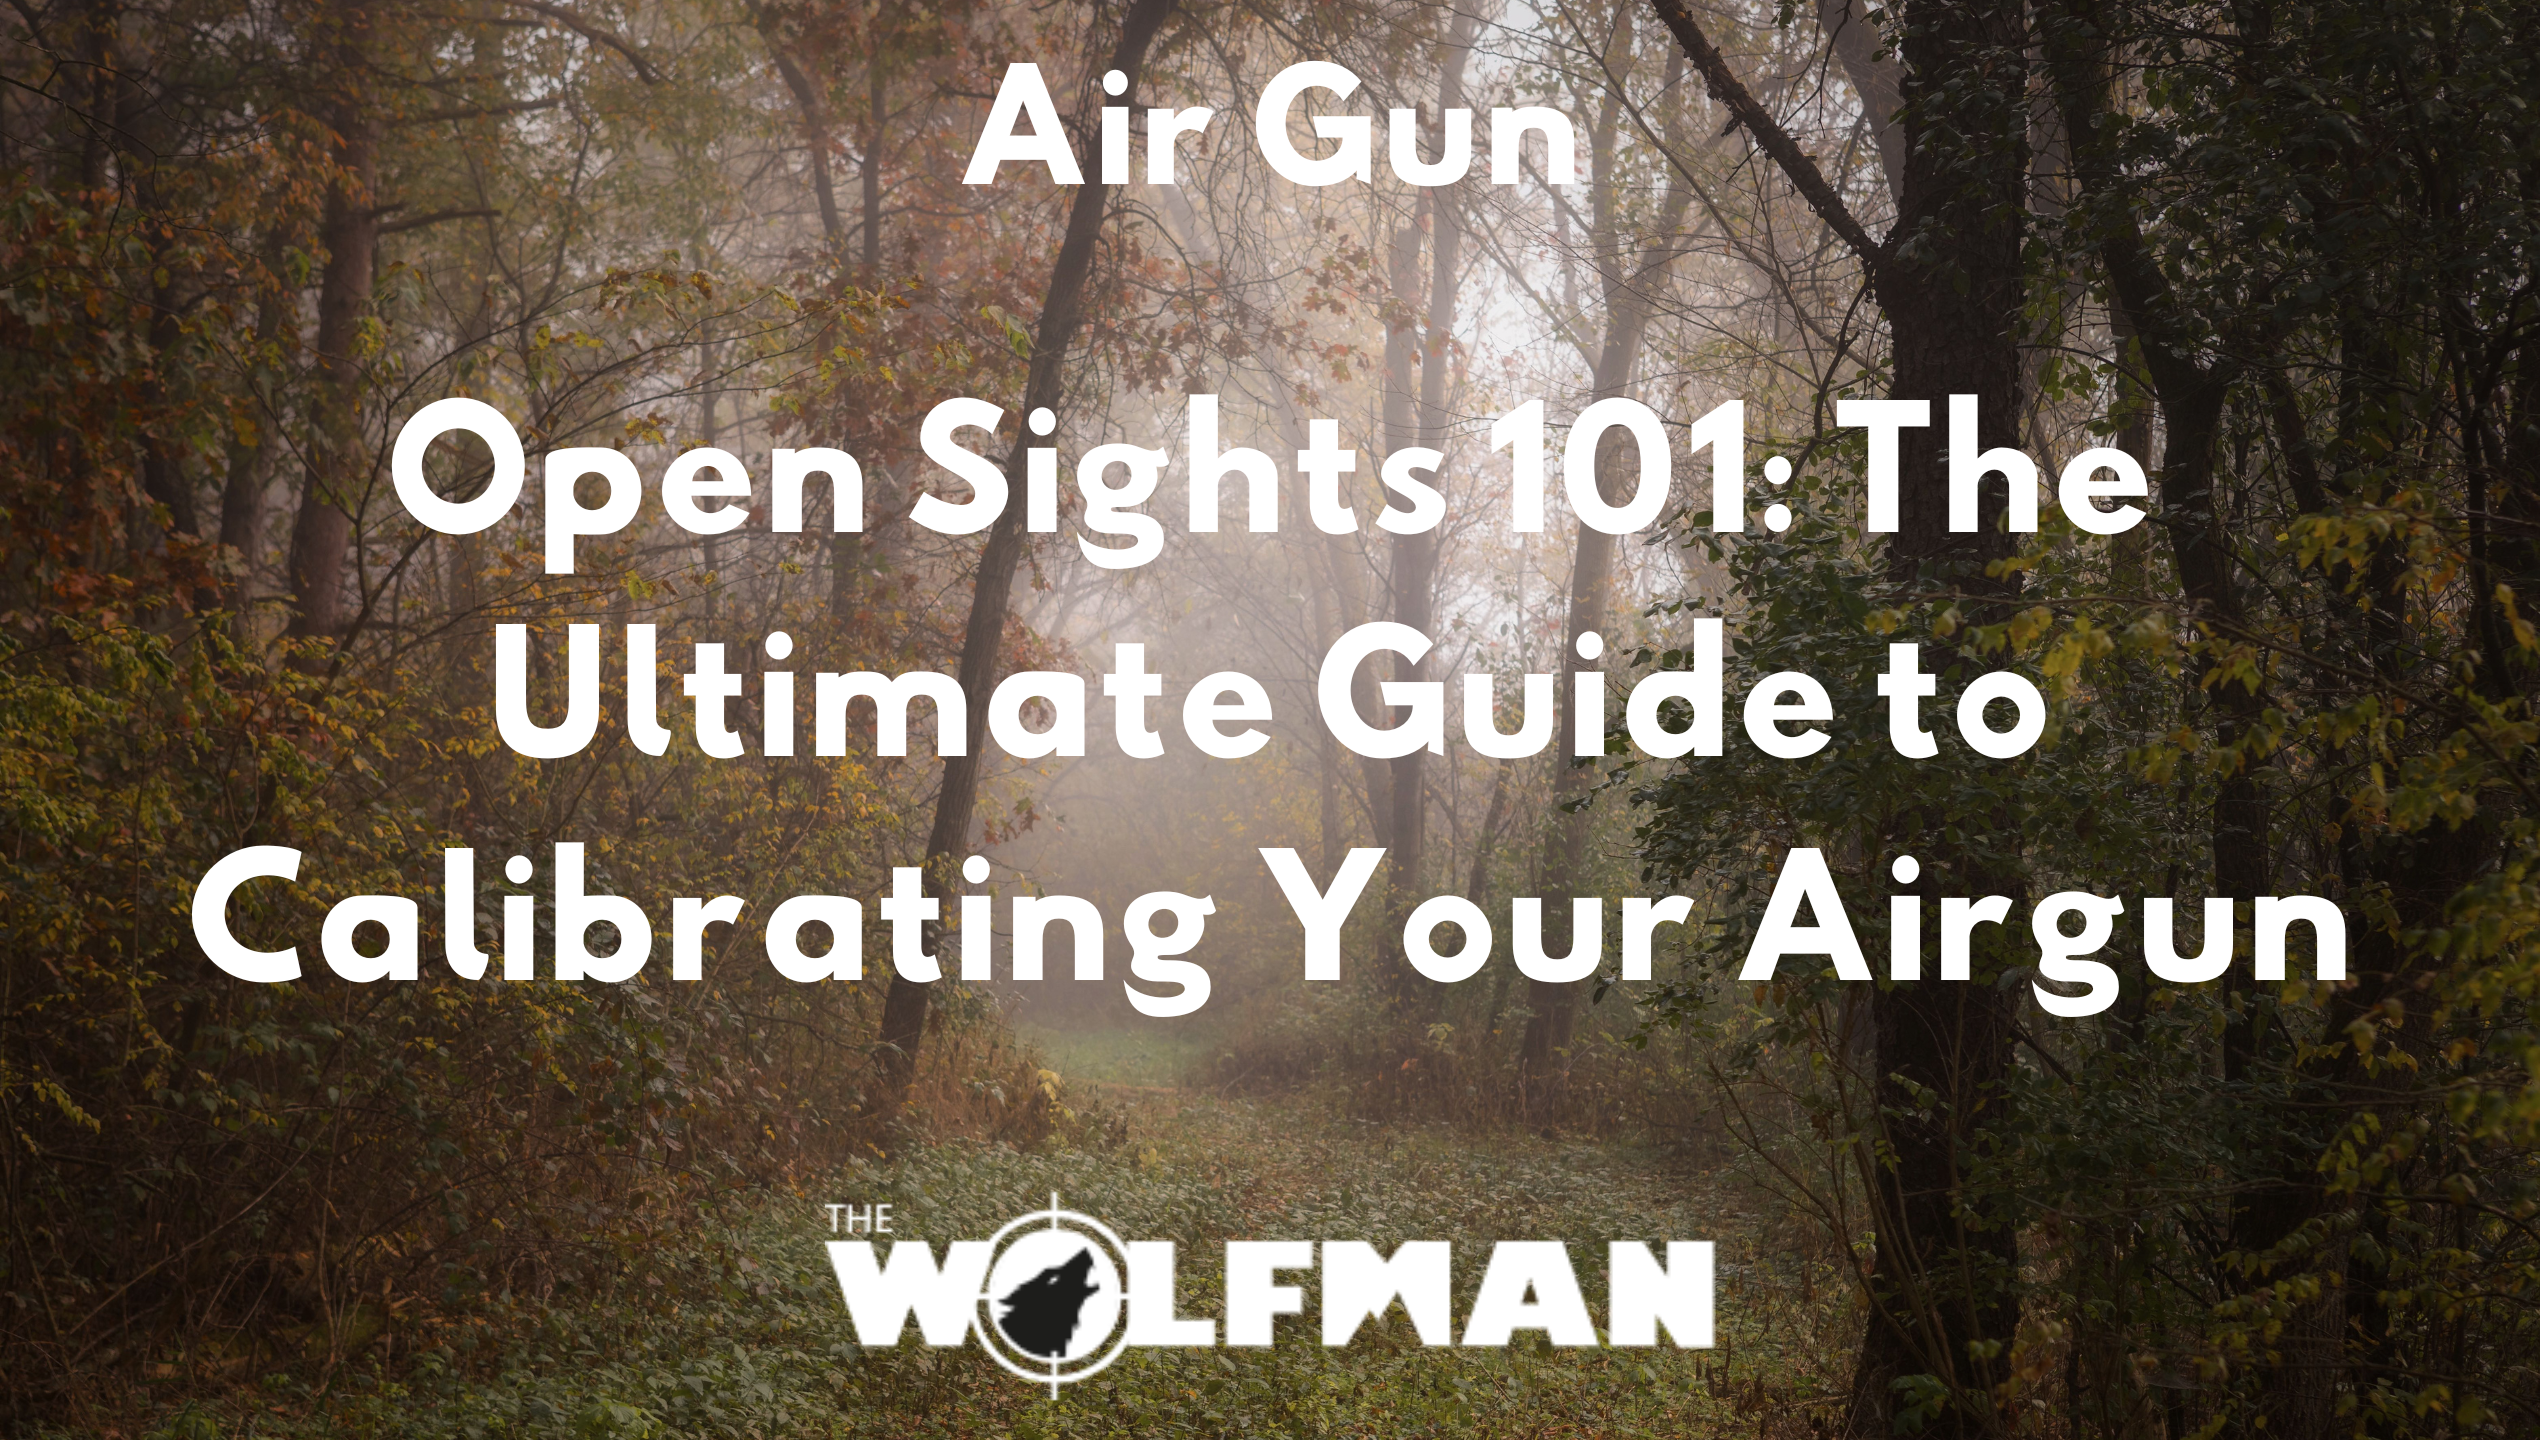 Open Sights 101: The Ultimate Guide to Calibrating Your Airgun